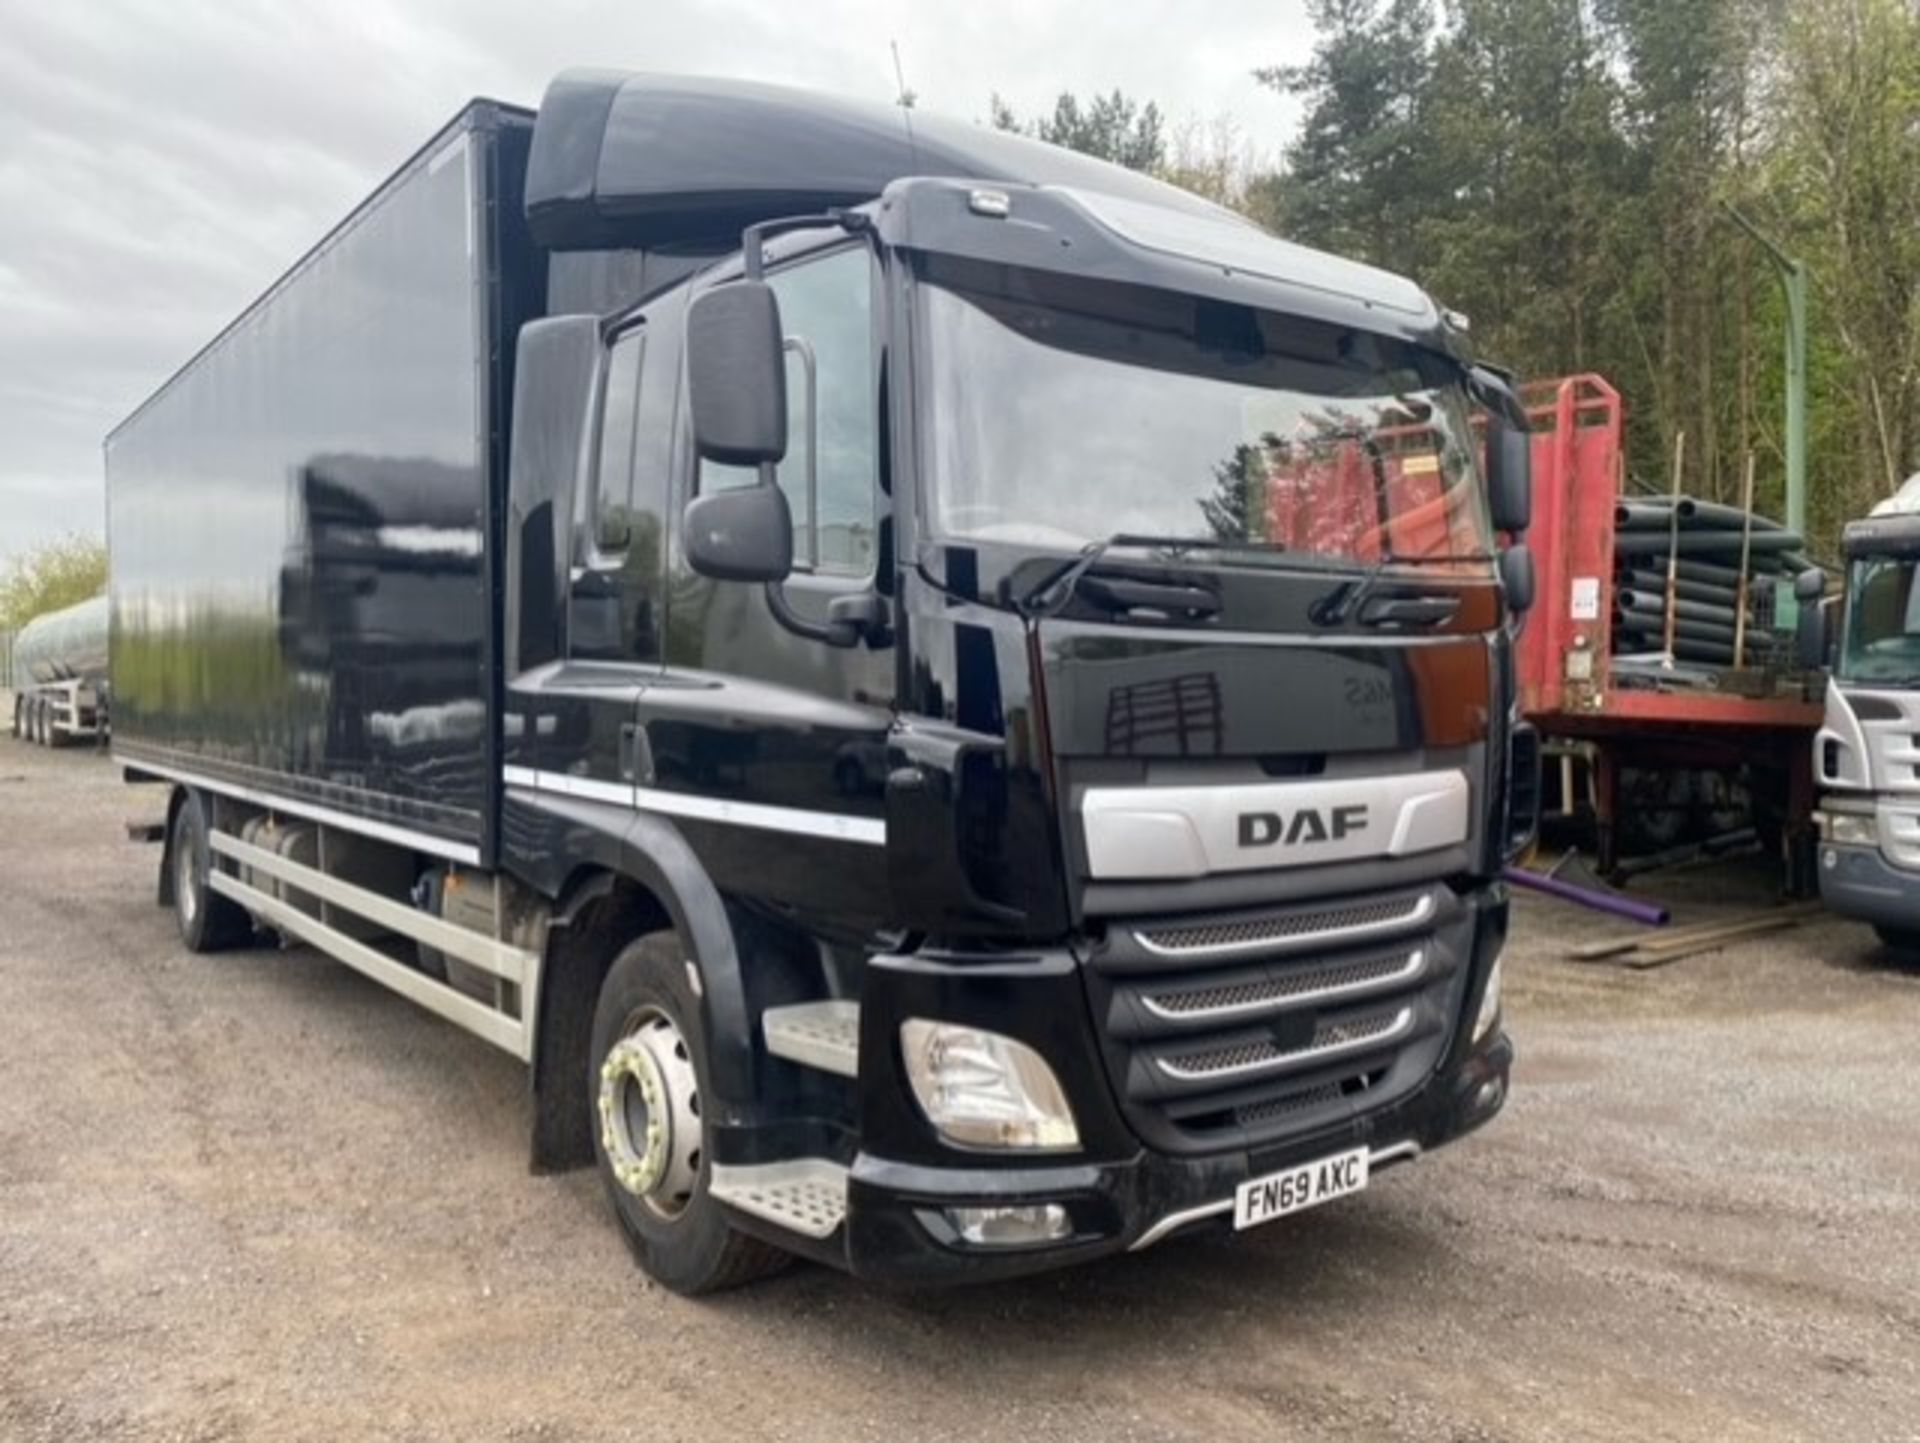 2019, DAF CF 260 FA - FN69 AXC (18 Ton Rigid Truck with Tail Lift) - Image 3 of 17